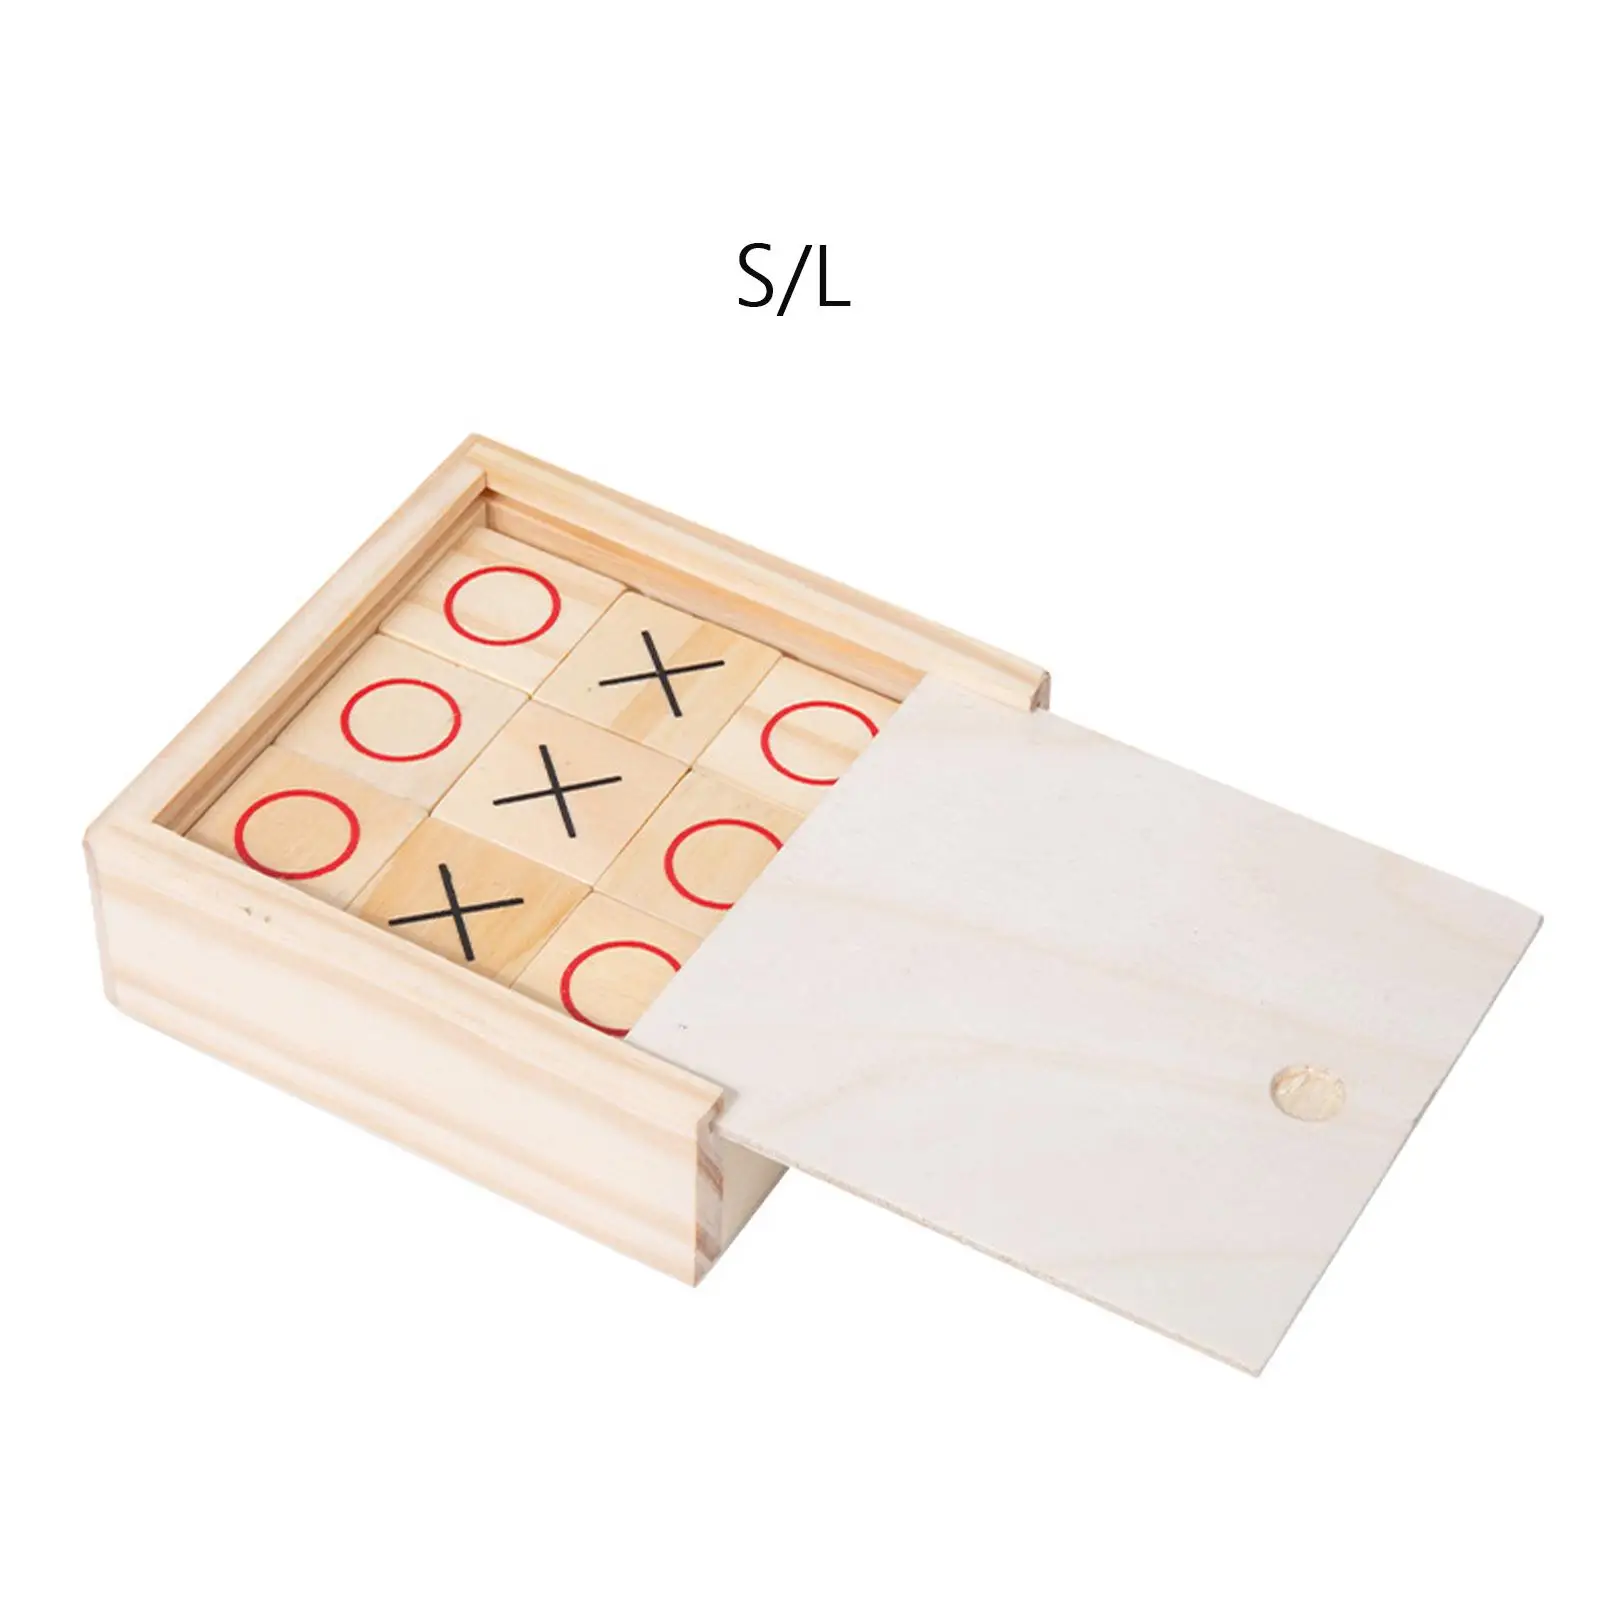 Tic TAC Toe Game Chess Board Game Family Games Classic Noughts and Crosses Wooden for Families Outdoor Indoor Adults Kids